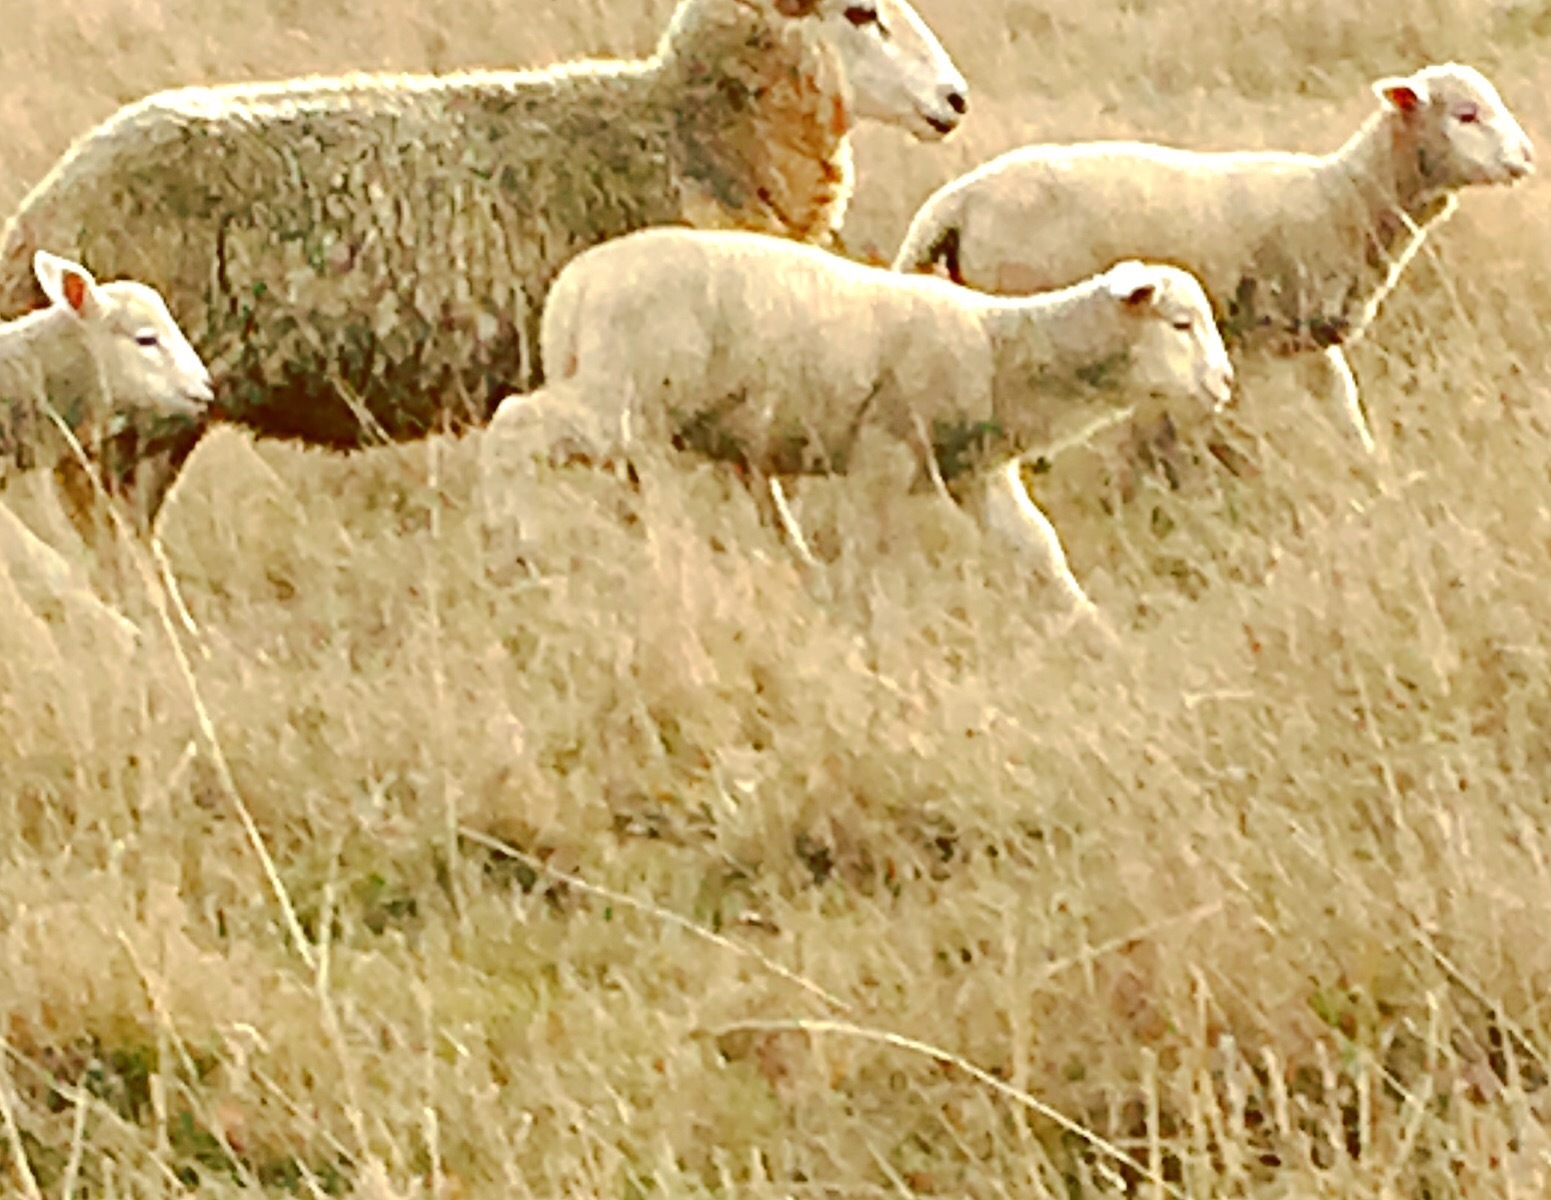 Sheep in the paddock blending in with the colour of the grass